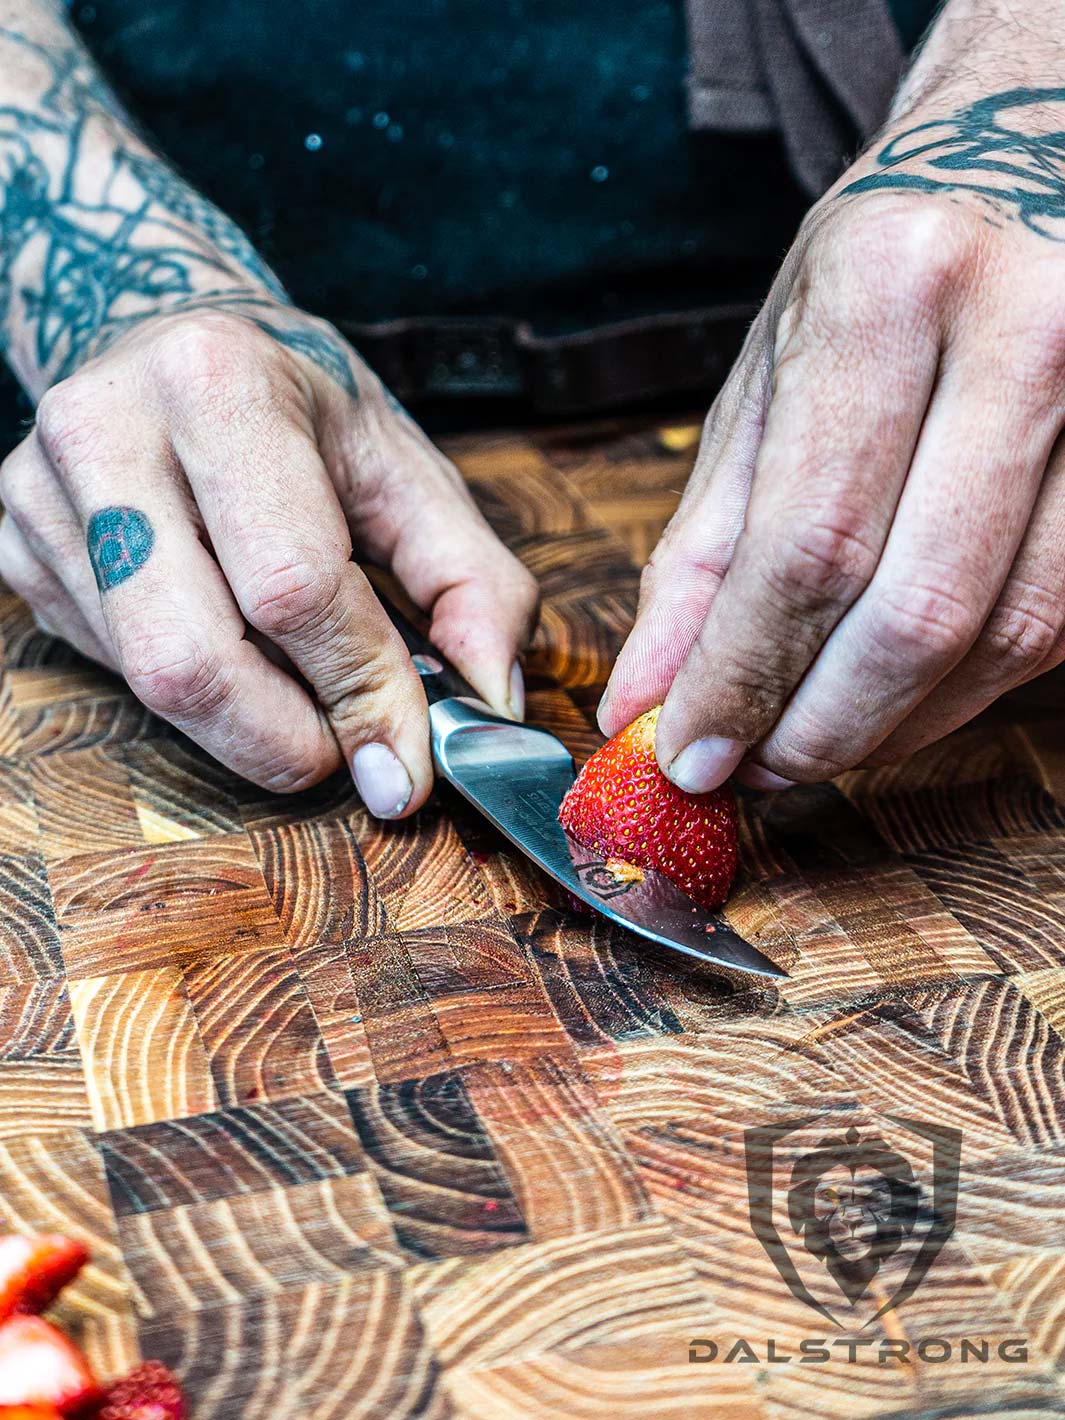 A man's hand holding the Dalstrong gladiator series 3 piece paring knife with black handle slicing a strawberry.